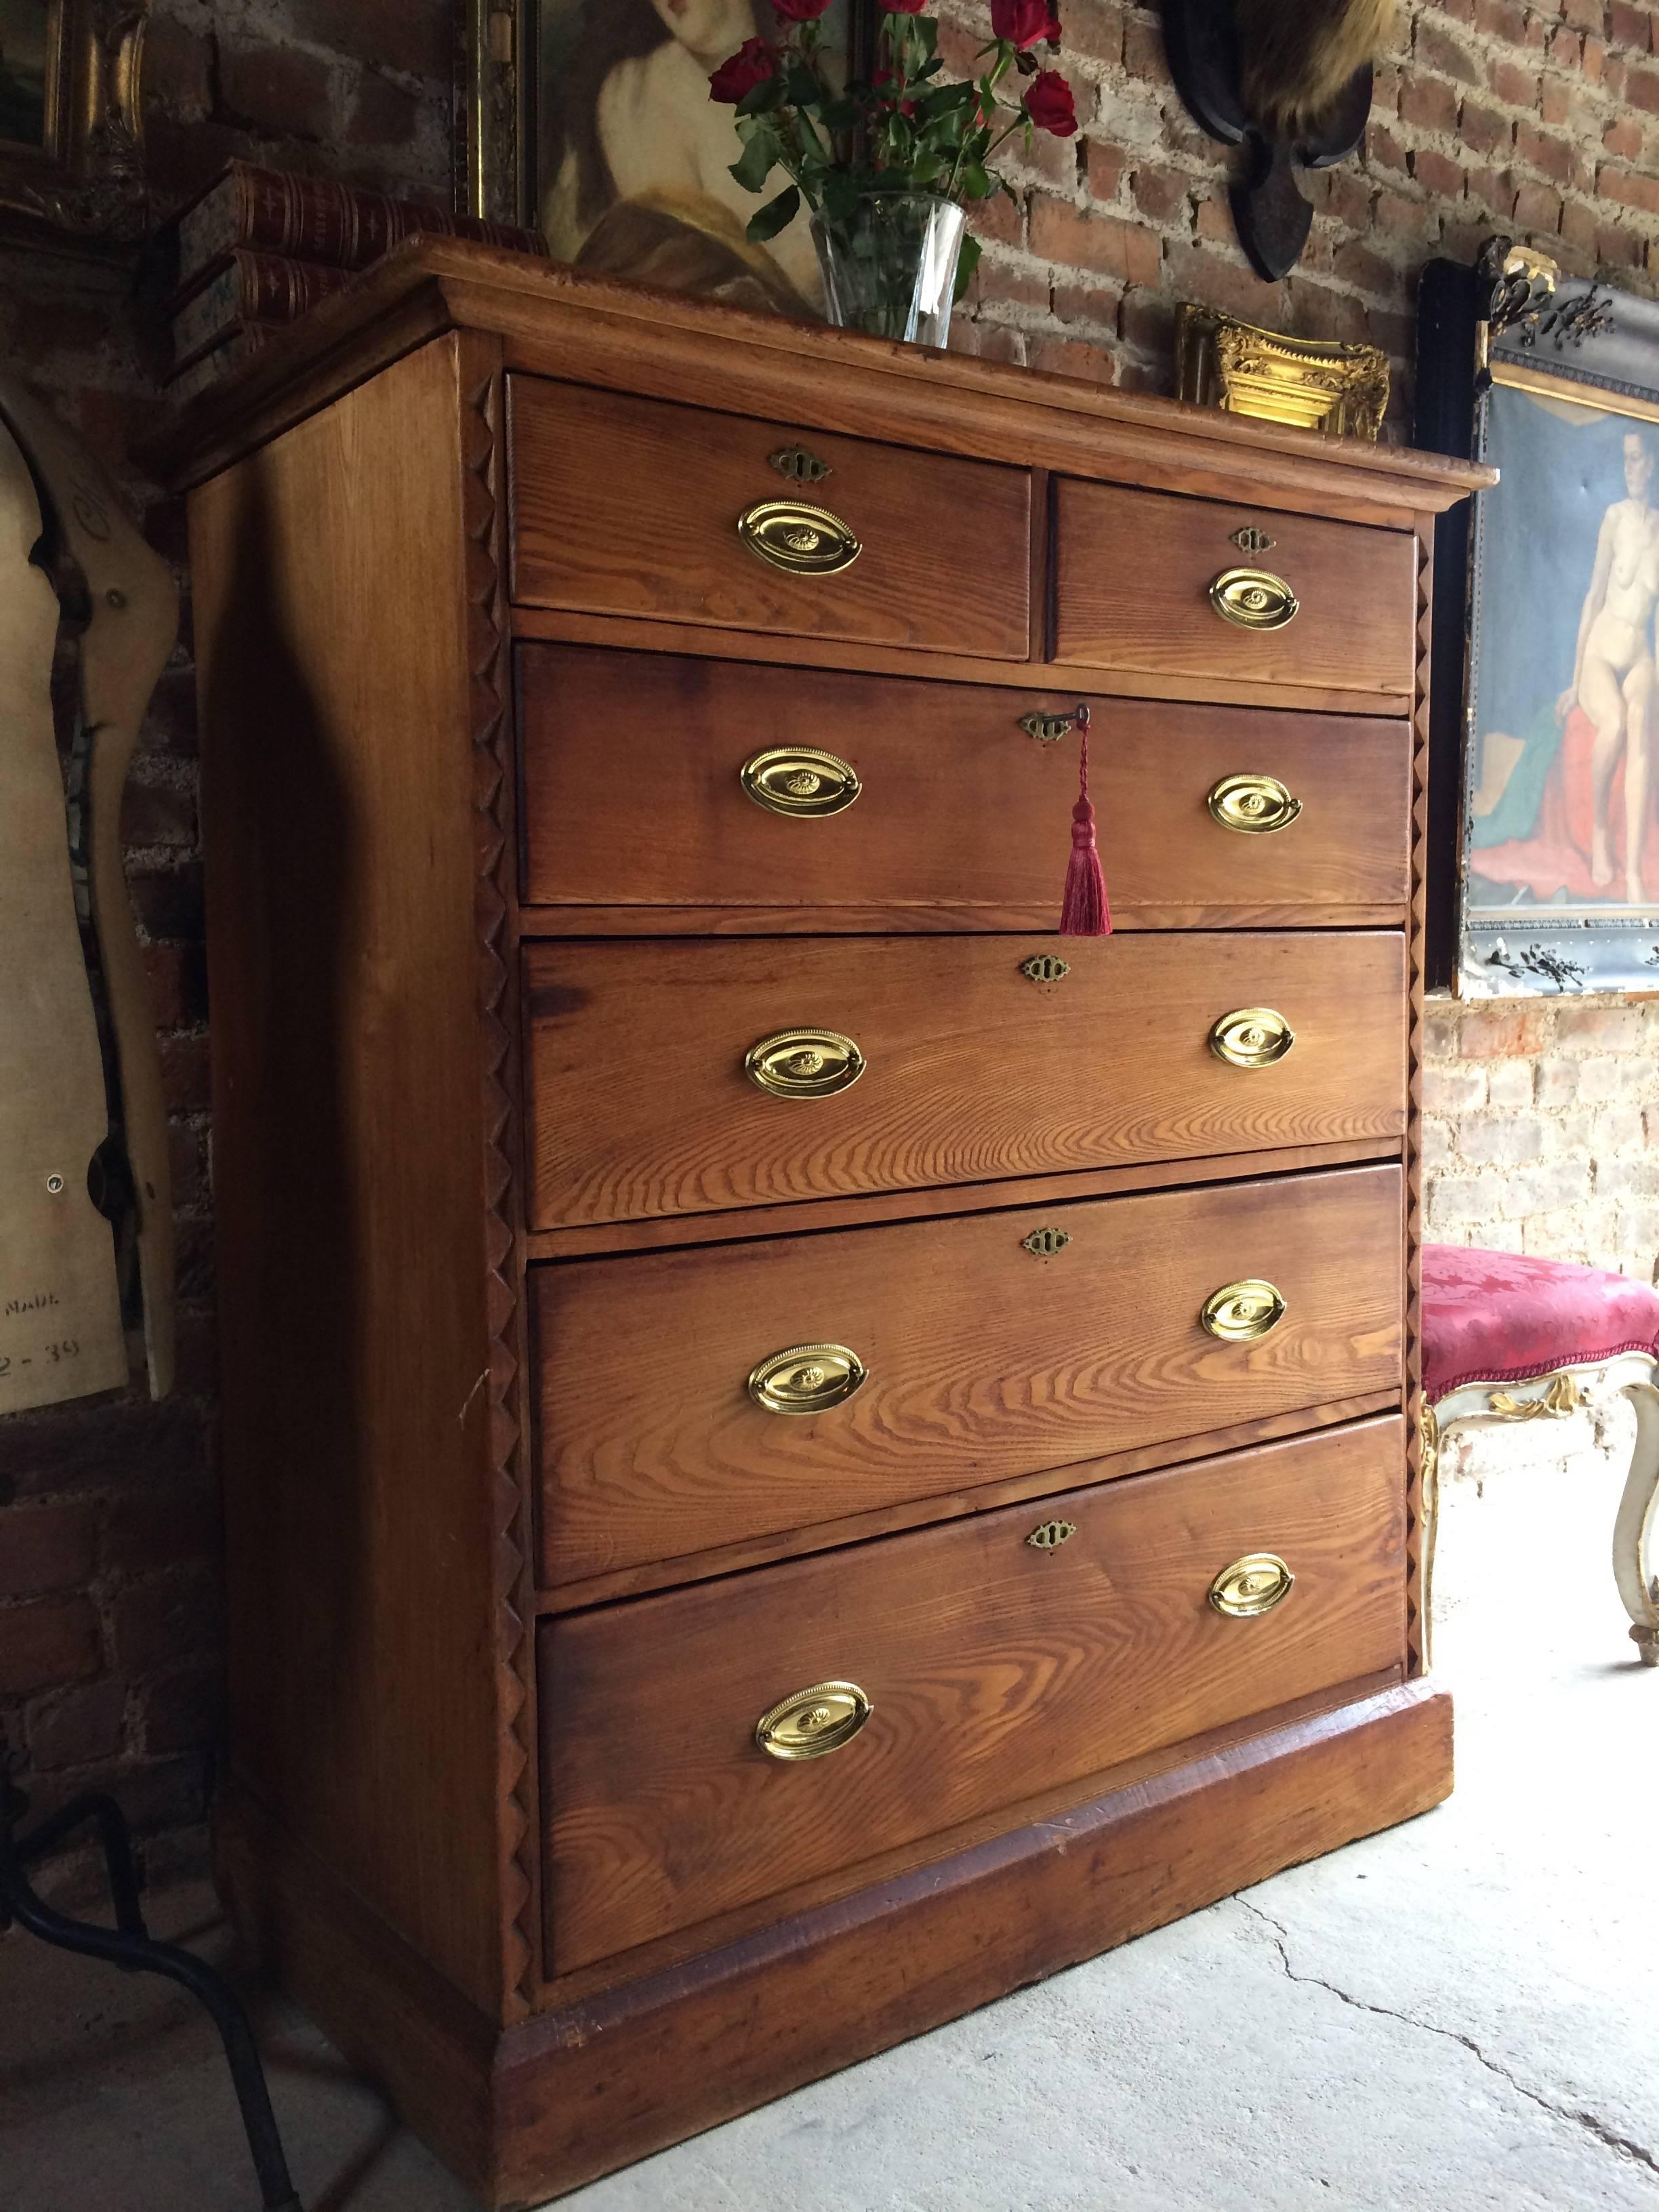 Late Victorian Antique 19th Century Victorian Solid Pine Chest of Drawers Dresser Very Large